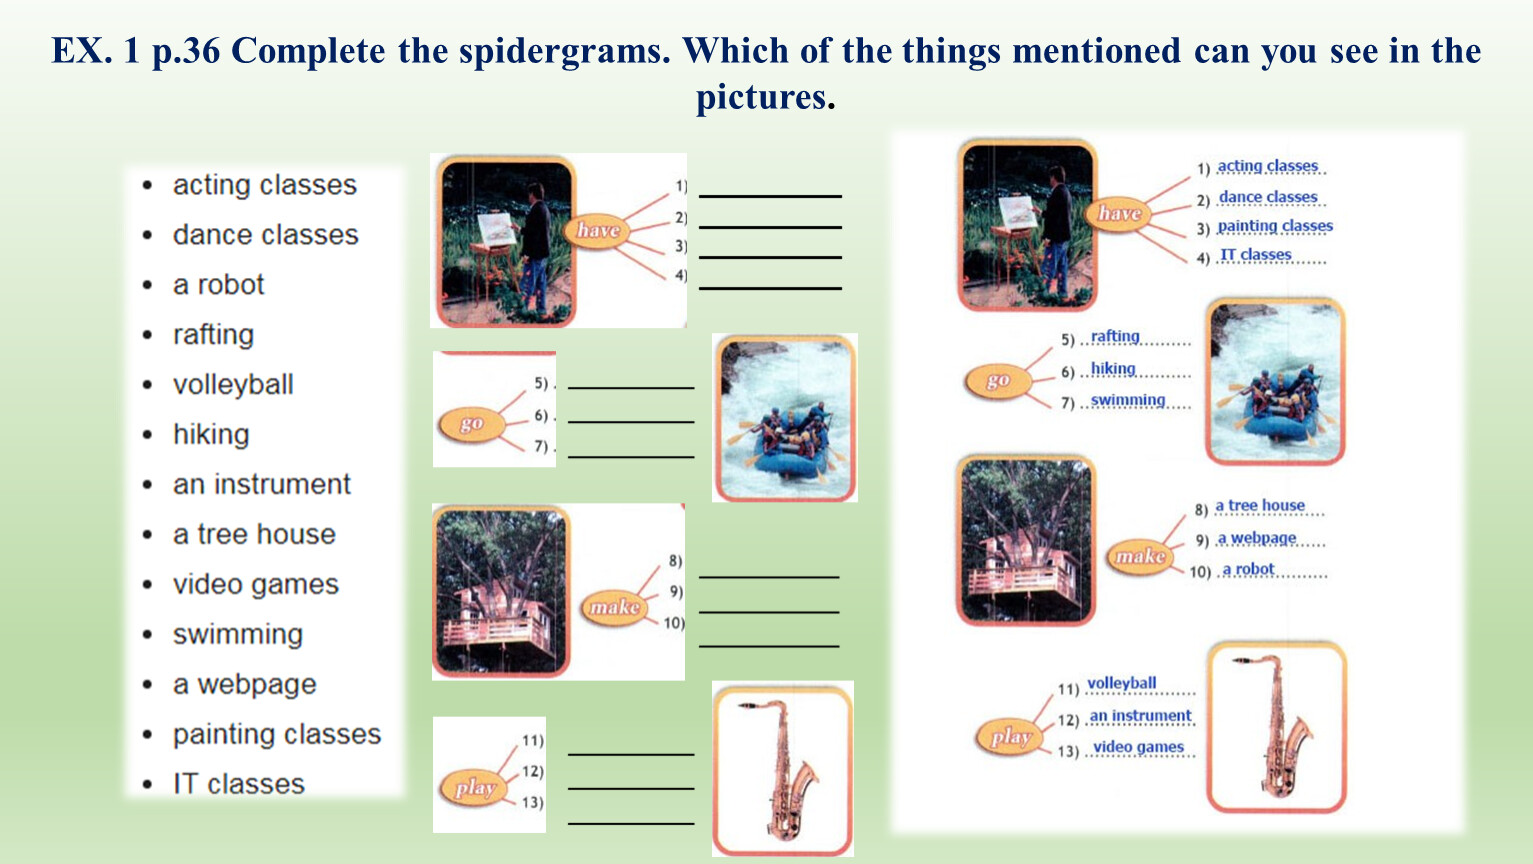 Can you do these things. Complete the spidergrams. Complete the spidergrams перевод. Complete the spidergrams Tall. Complete the spidergrams 5 класс.